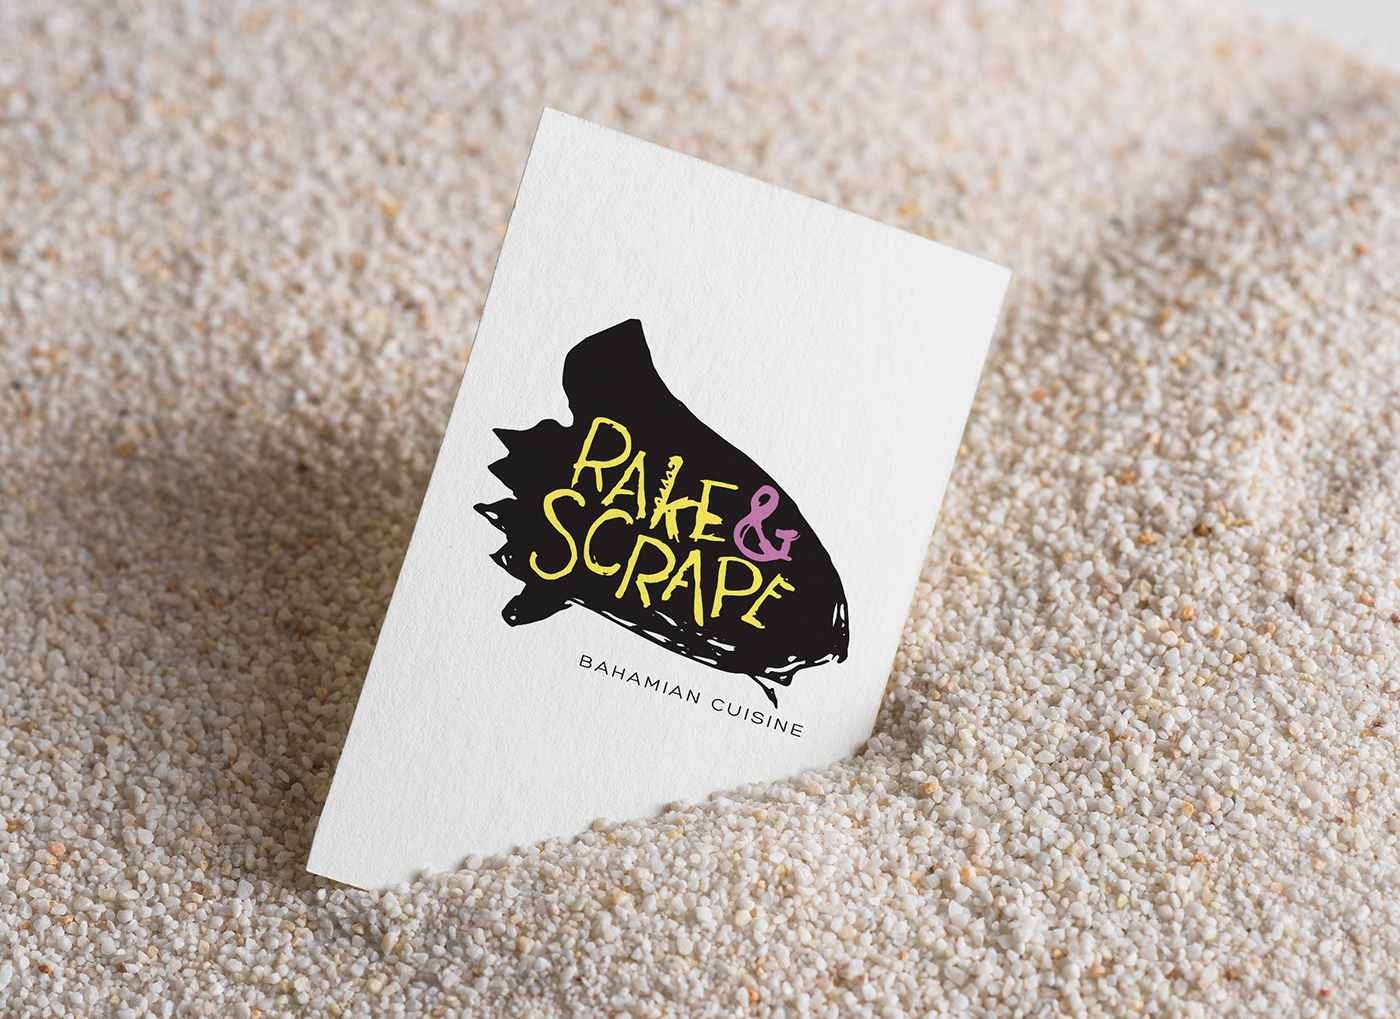 Business card propped up in white sand with restaurant logo printed in center